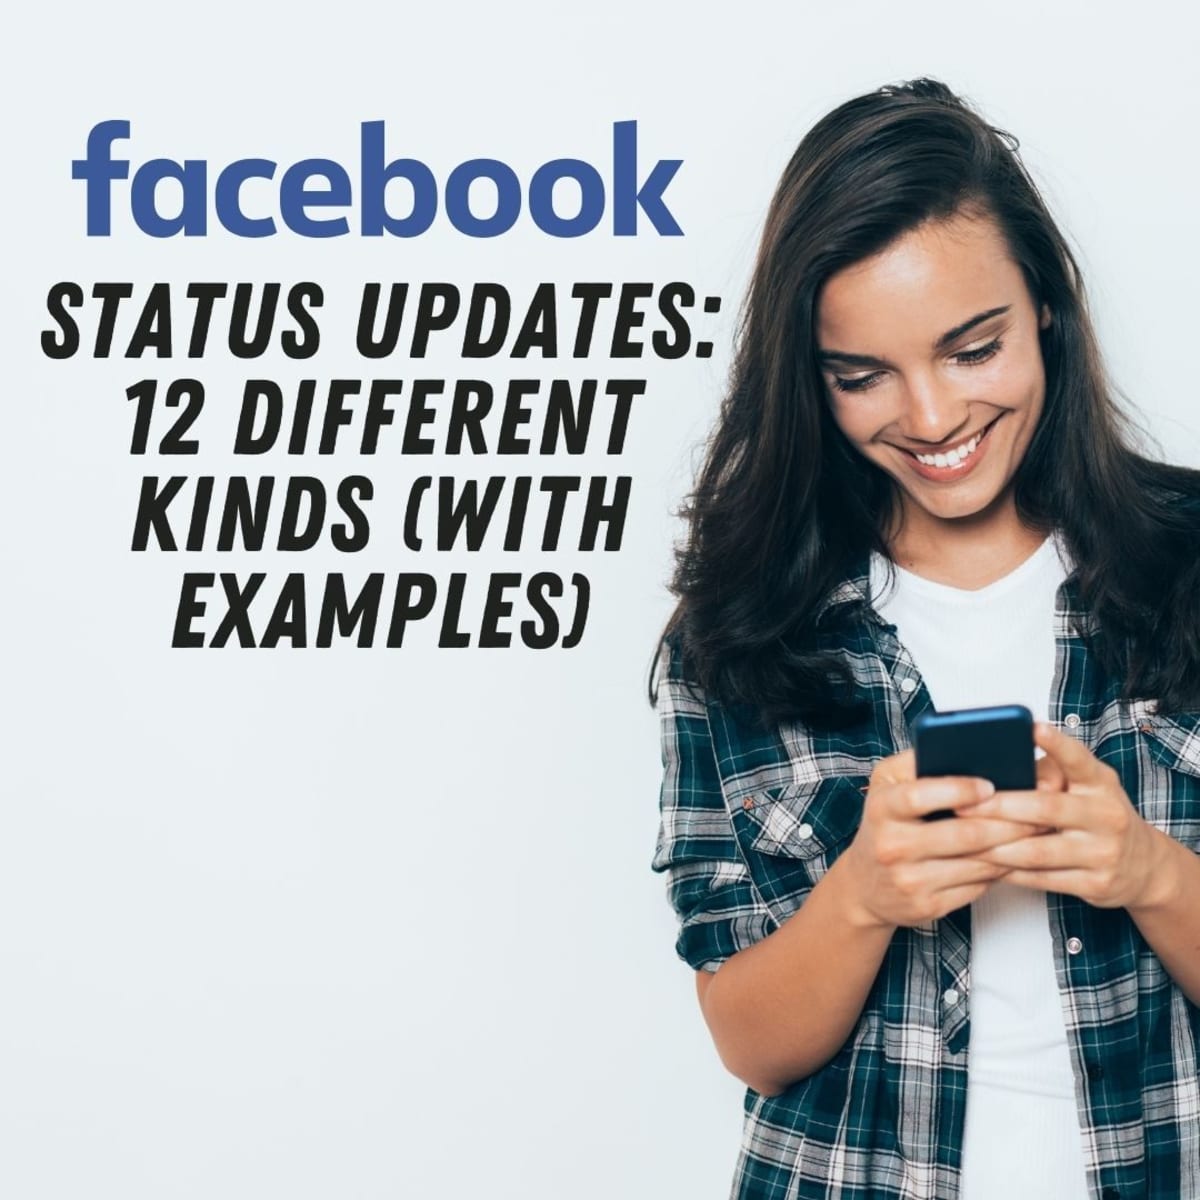 The 12 Types of Facebook Status Updates (With Examples) - TurboFuture